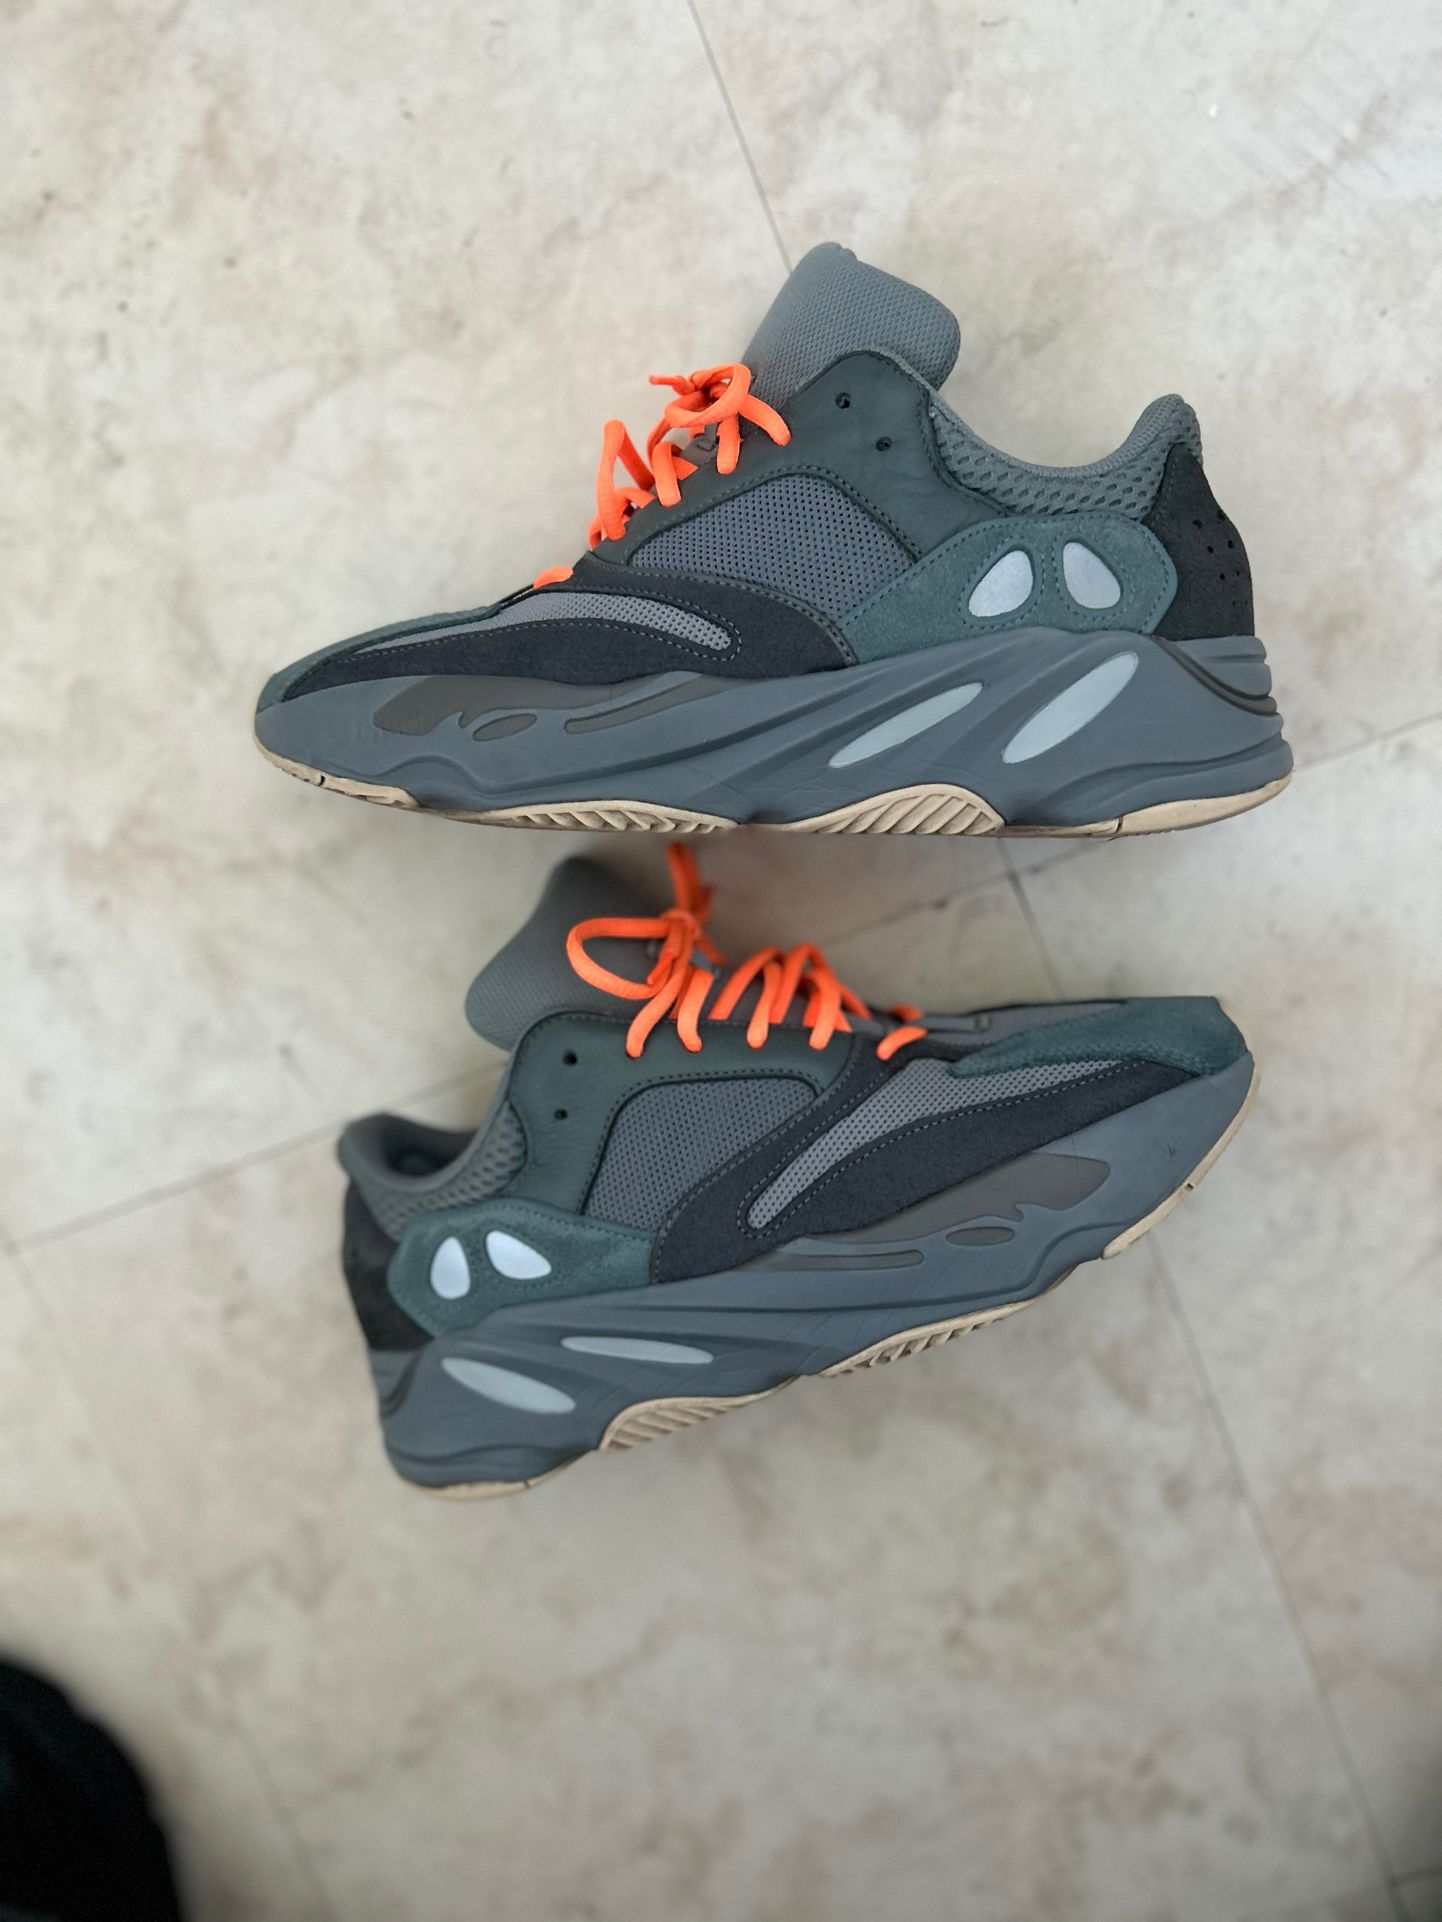 Yeezy 700 Teal Blue size (10.5)